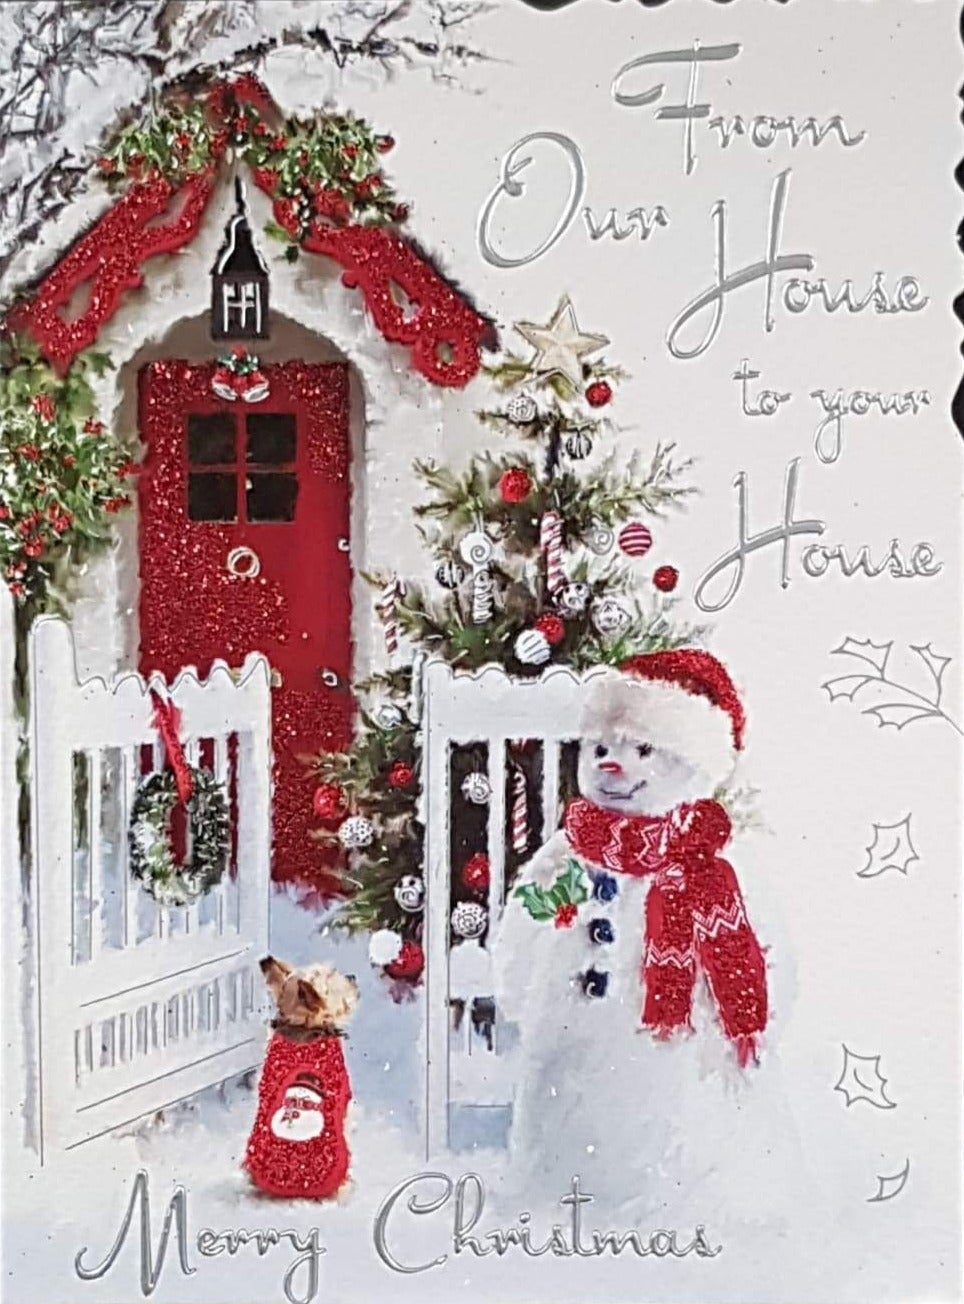 From Our House To Your House Christmas Card - Merry Christmas & A Dog and Snowman & Red Door